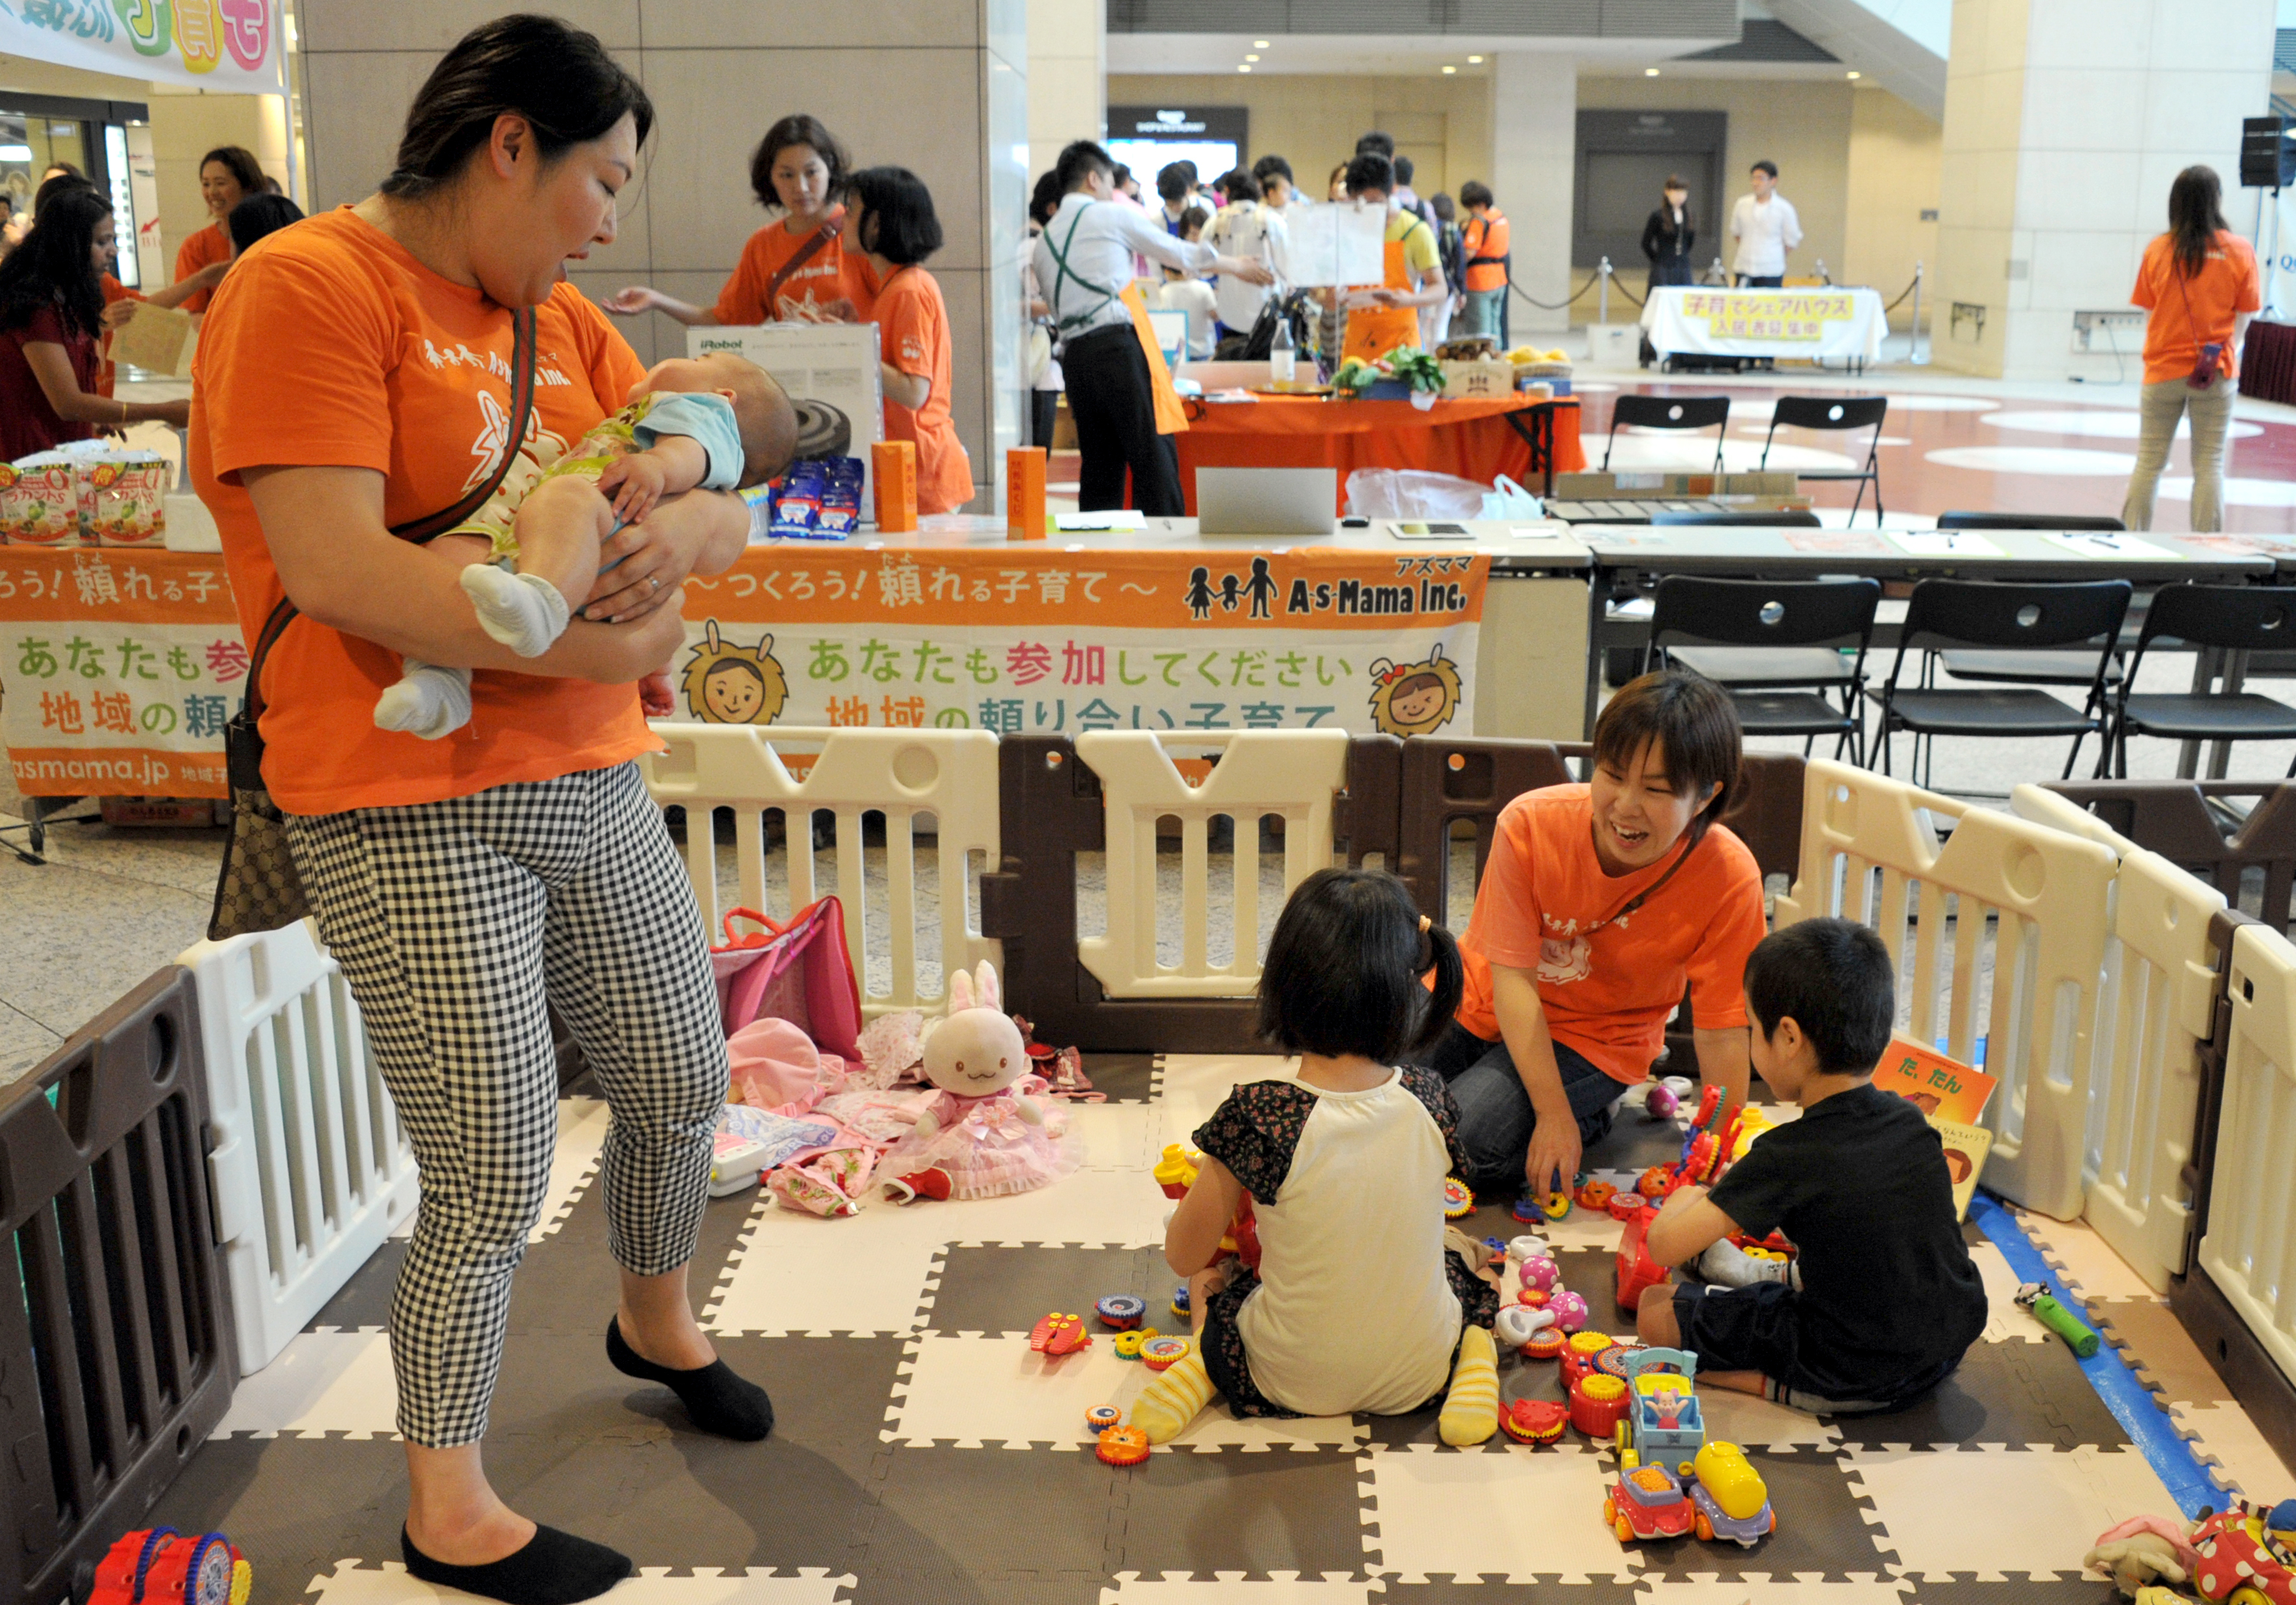 Two care providers look after children while their parents participate in an event sponsored by AsMama Inc. at Queens Square Yokohama on June 7. | YOSHIAKI MIURA